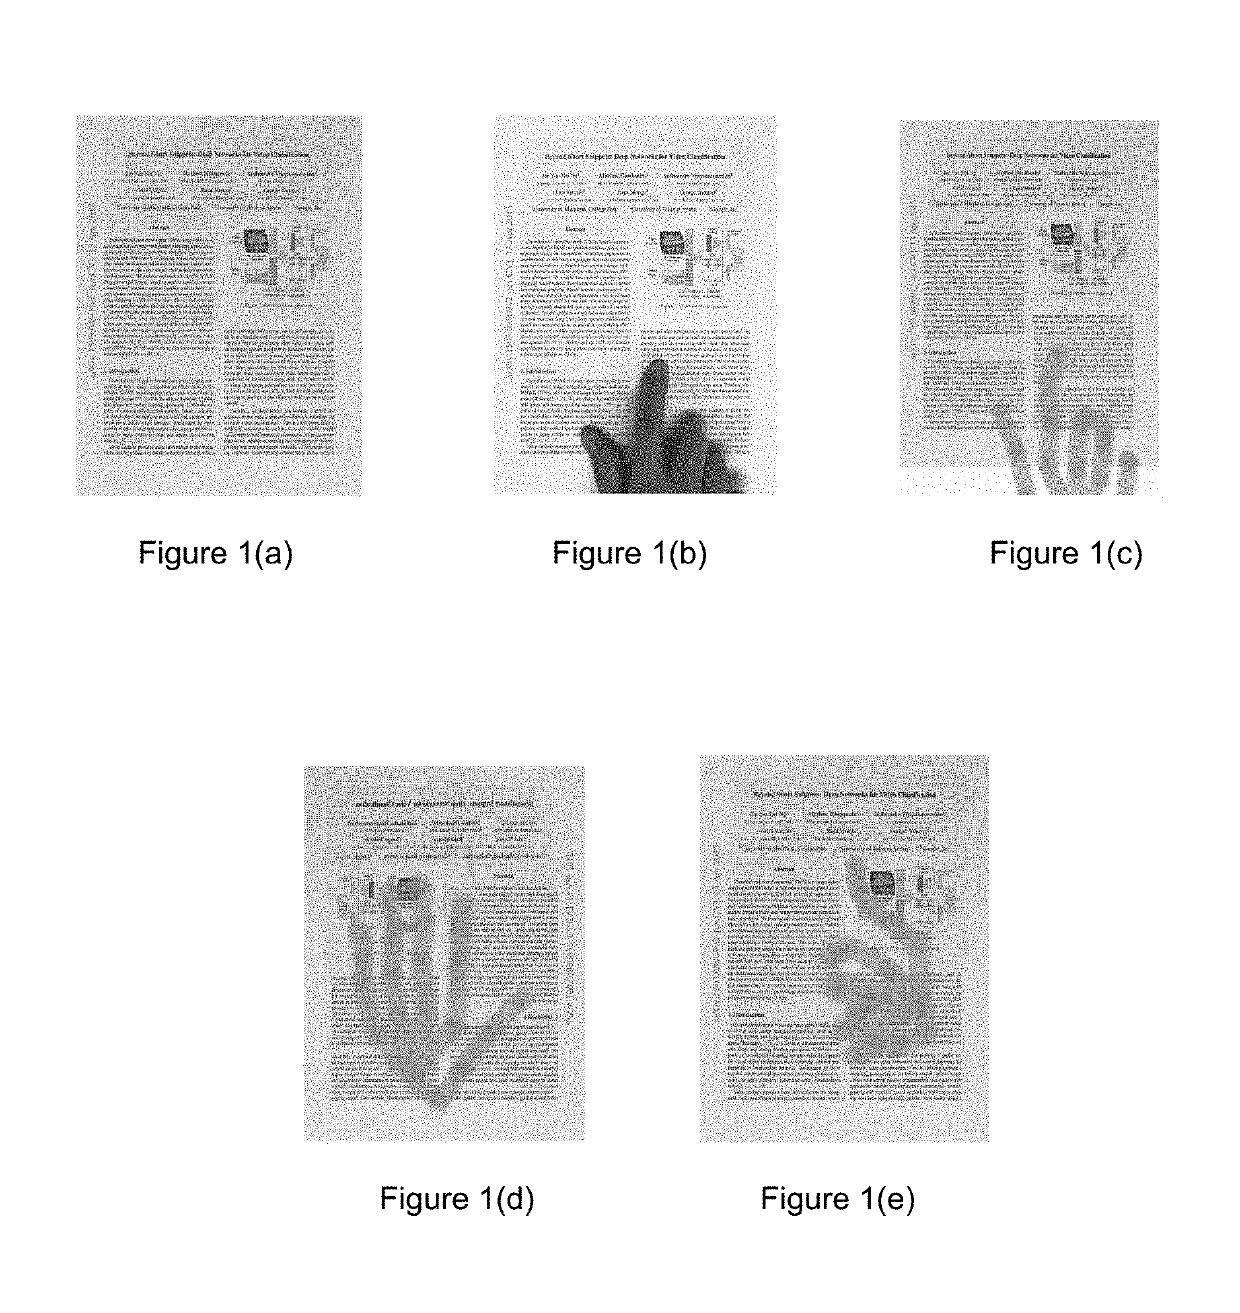 Systems and methods for capturing and rendering hand skeletons over documents images for telepresence